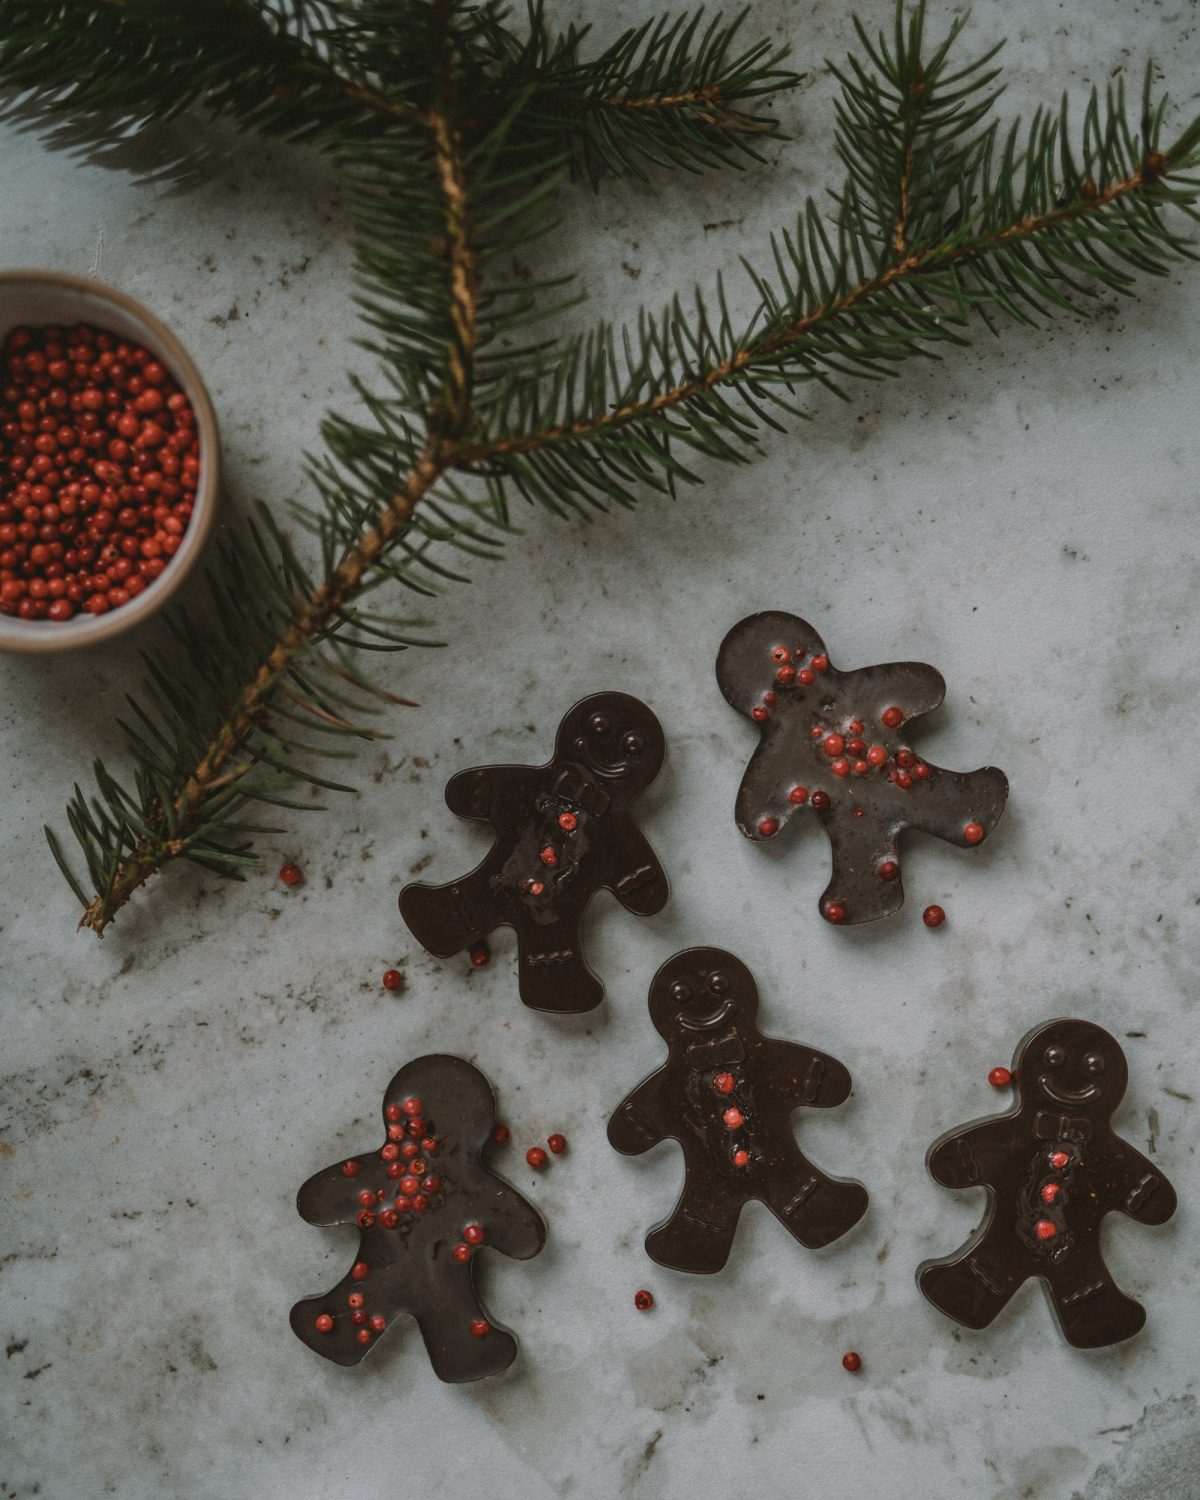 chocolate gingerbread melts on a table with pine needles and peppercorns